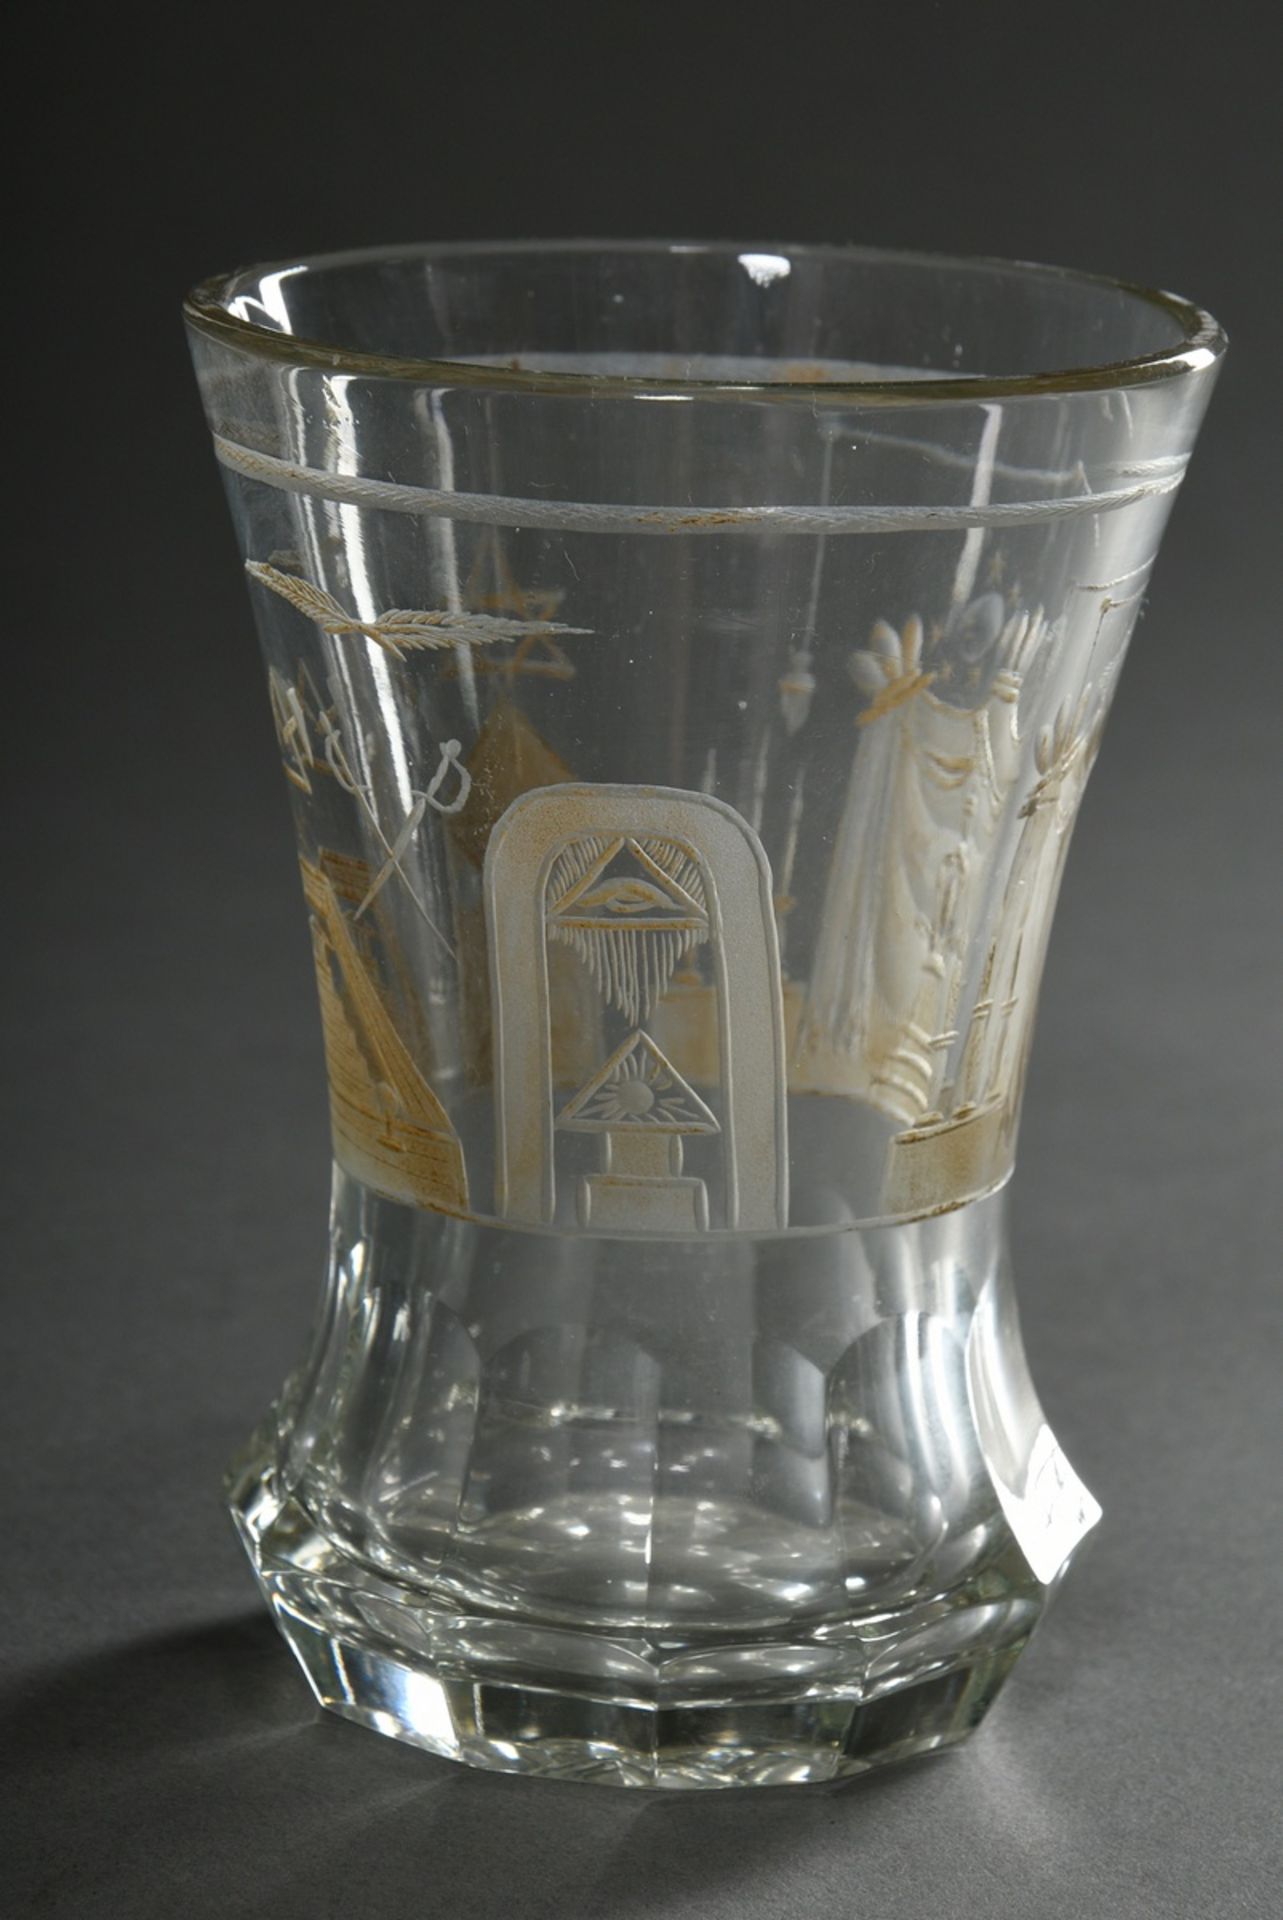 Freemason pedestal pot with rich symbol cut and delicate remnants of gilding, laced 11-fold faceted - Image 3 of 4